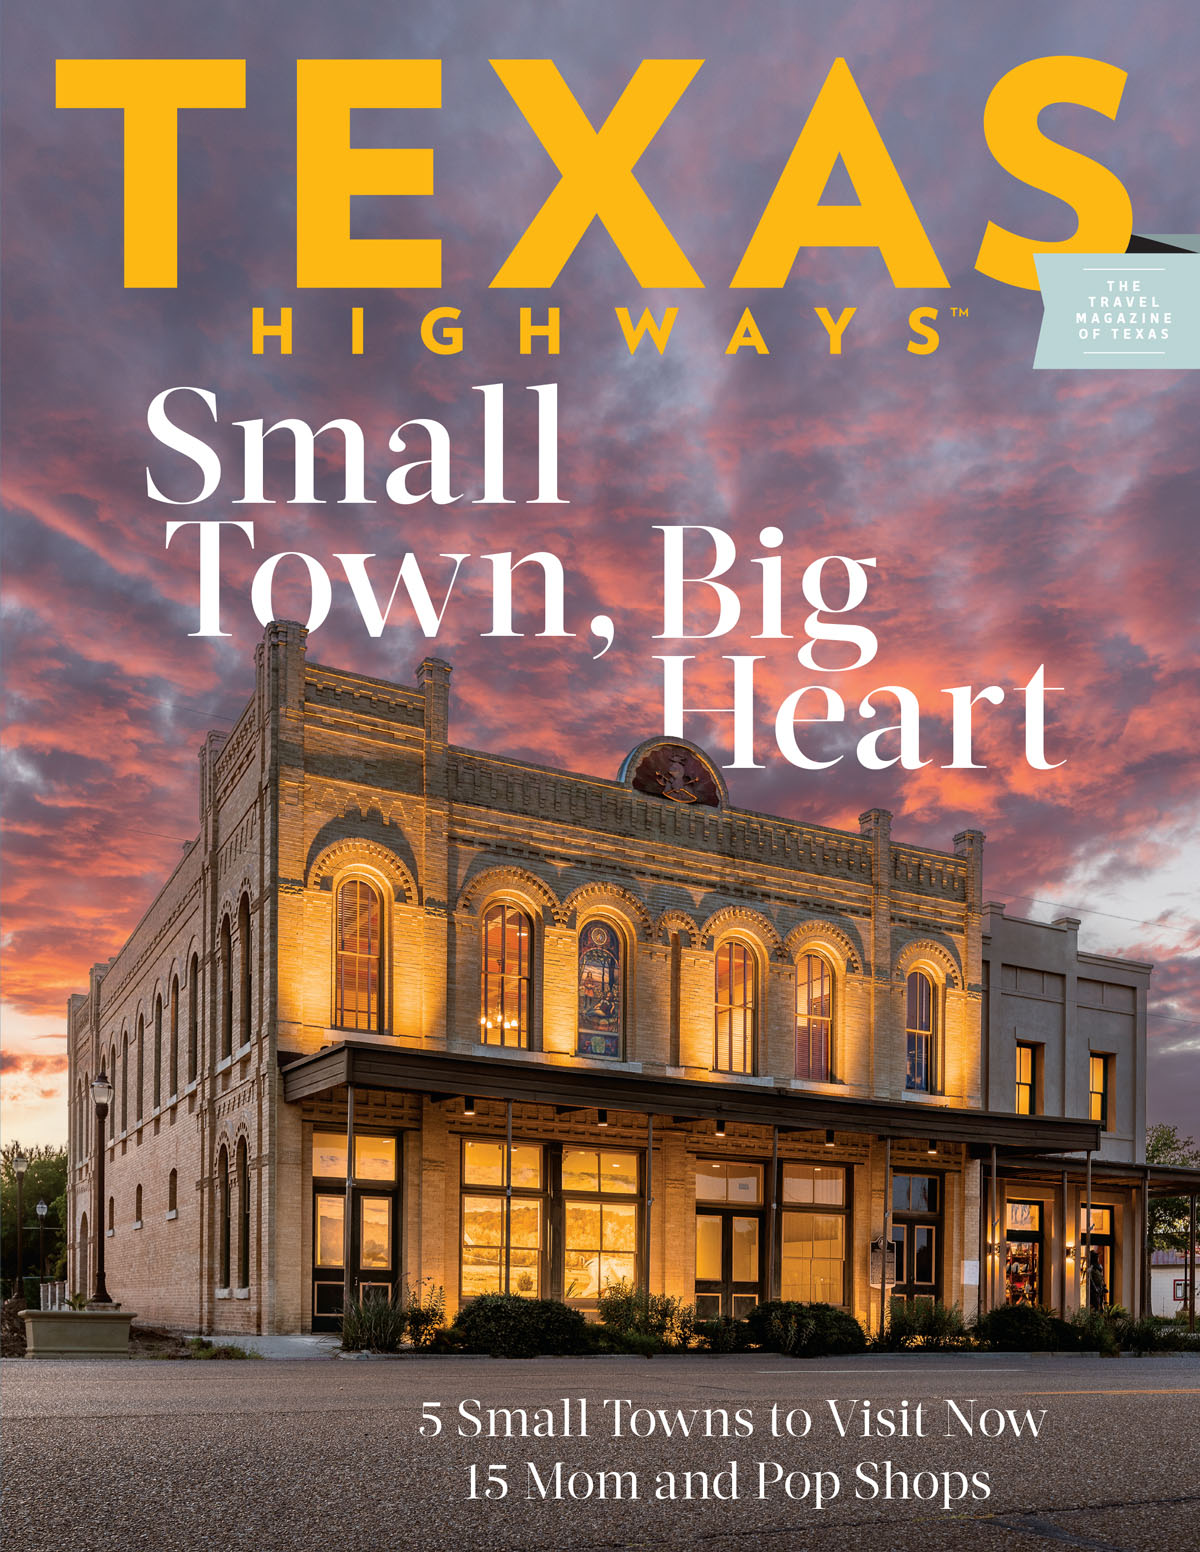 The August 2022 cover of Texas Highways Magazine